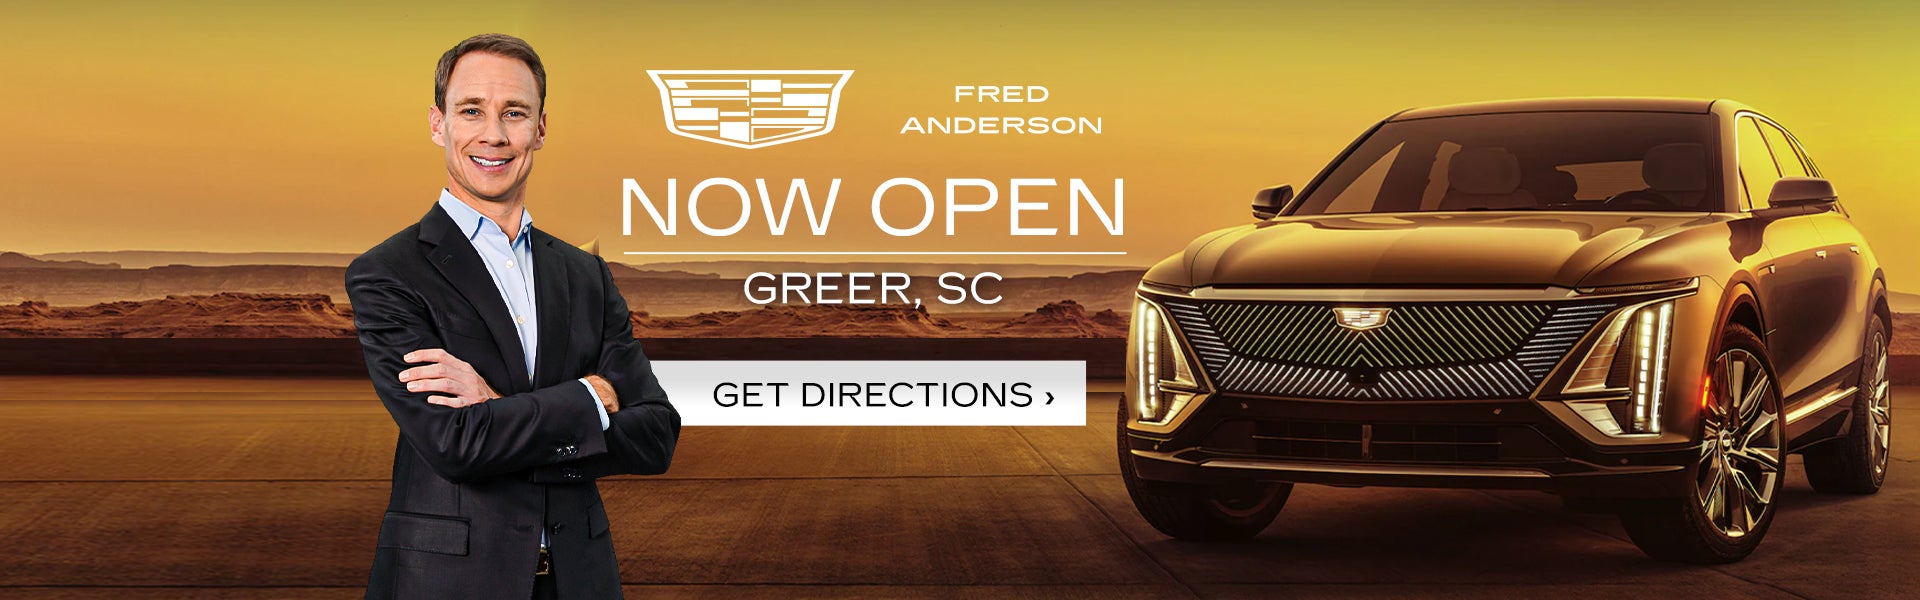 Fred Anderson Cadillac Now Open - Get Directions